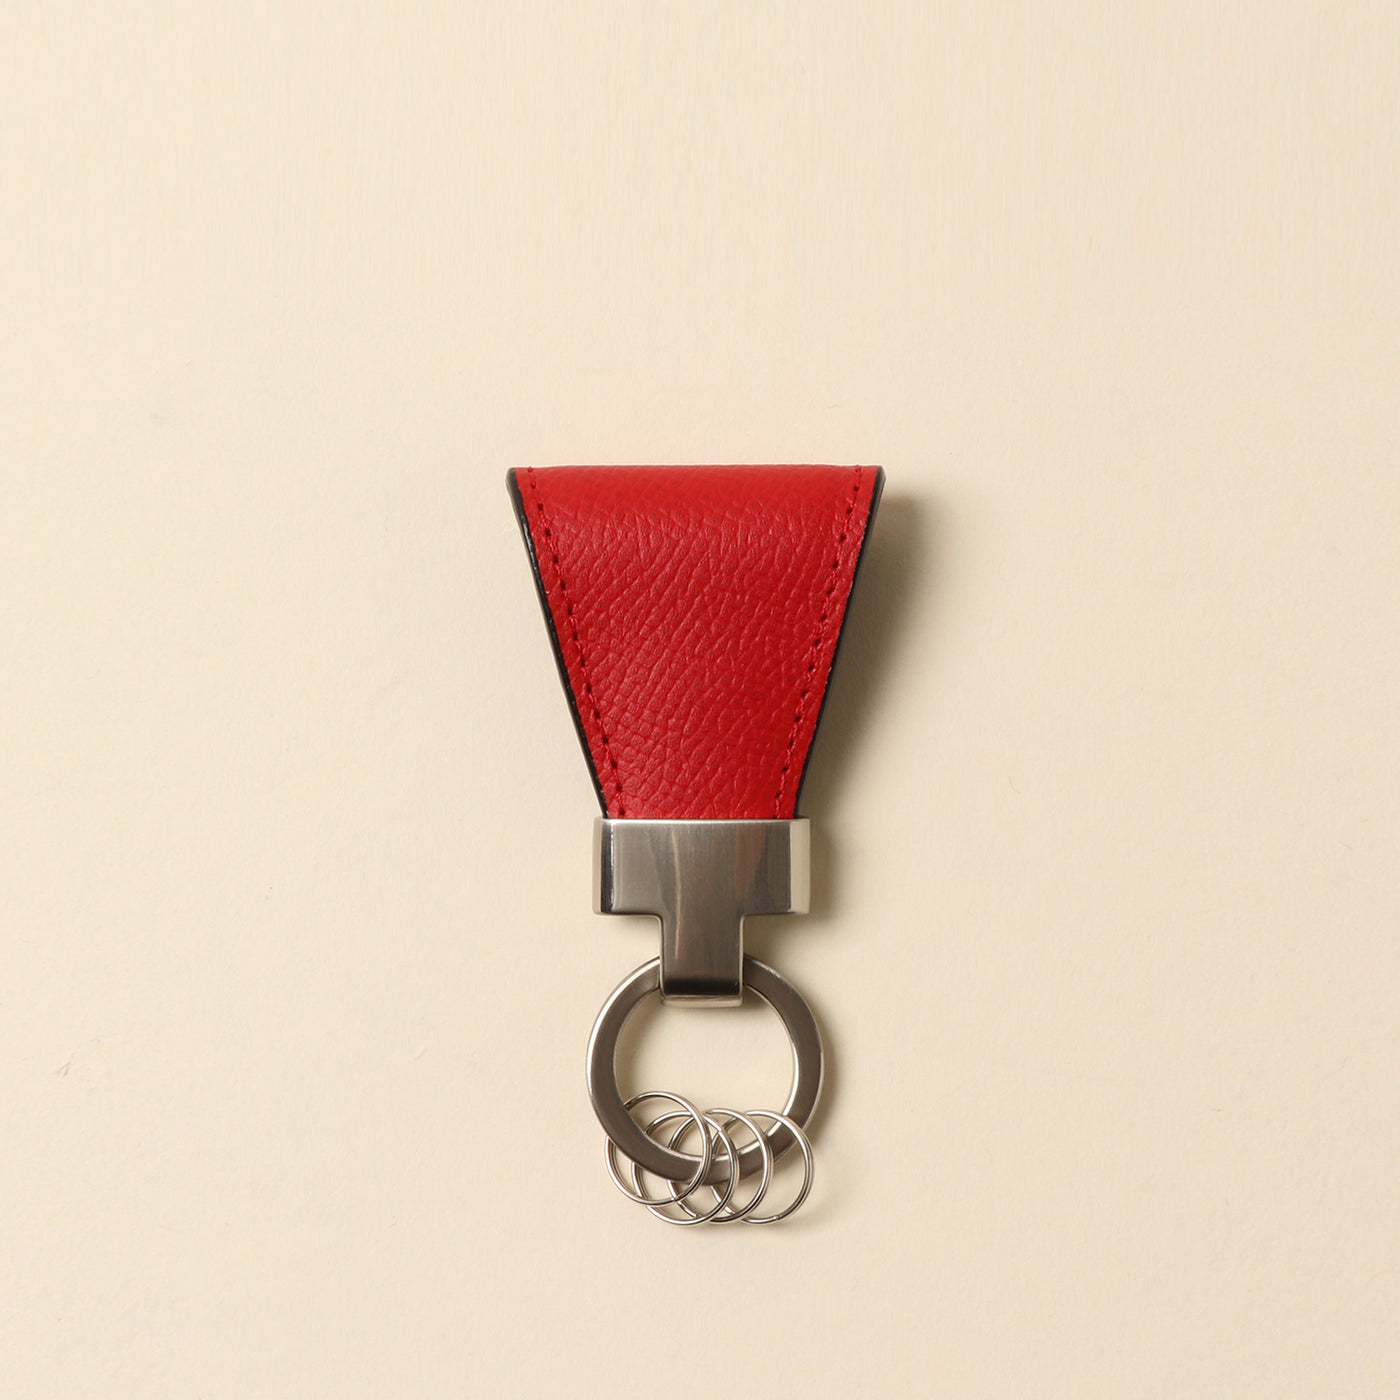 ＜VINTAGE REVIVAL PRODUCTIONS> Key clip calf leather/red